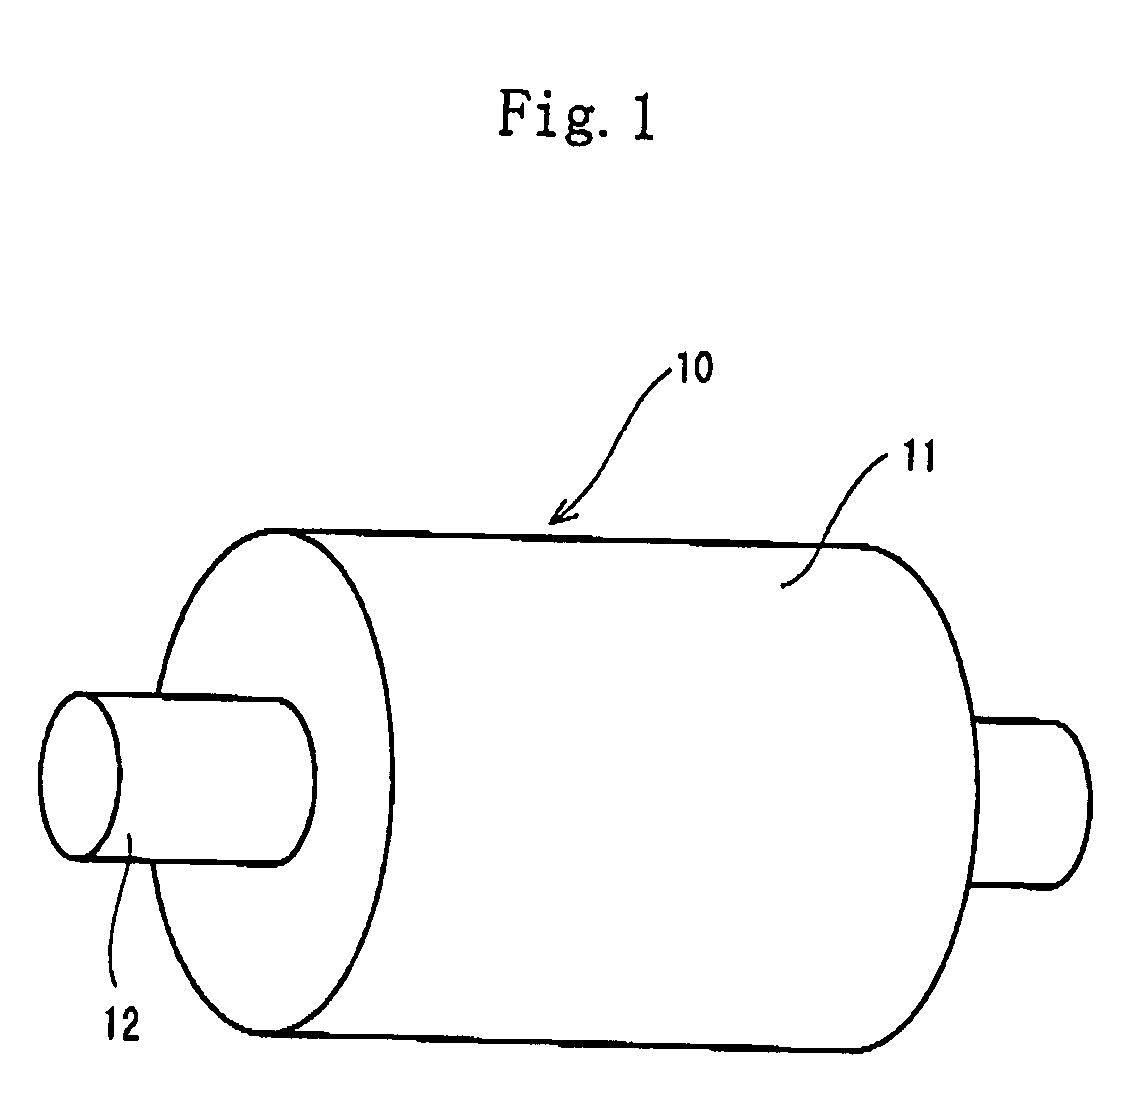 Conductive member for image-forming apparatus